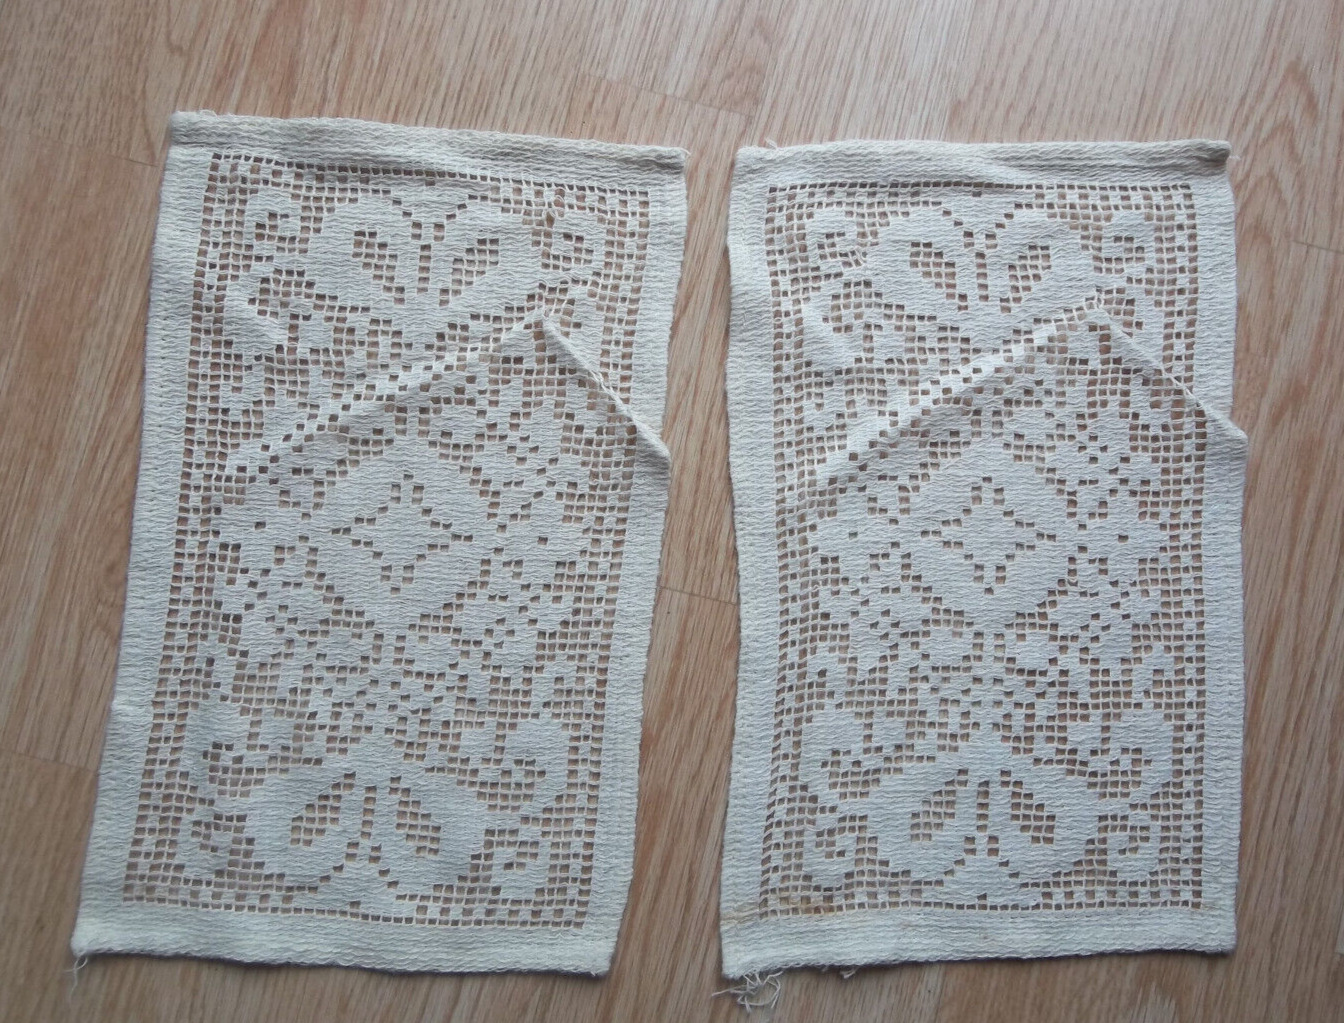 Pair of Vintage Doilies - Ivory